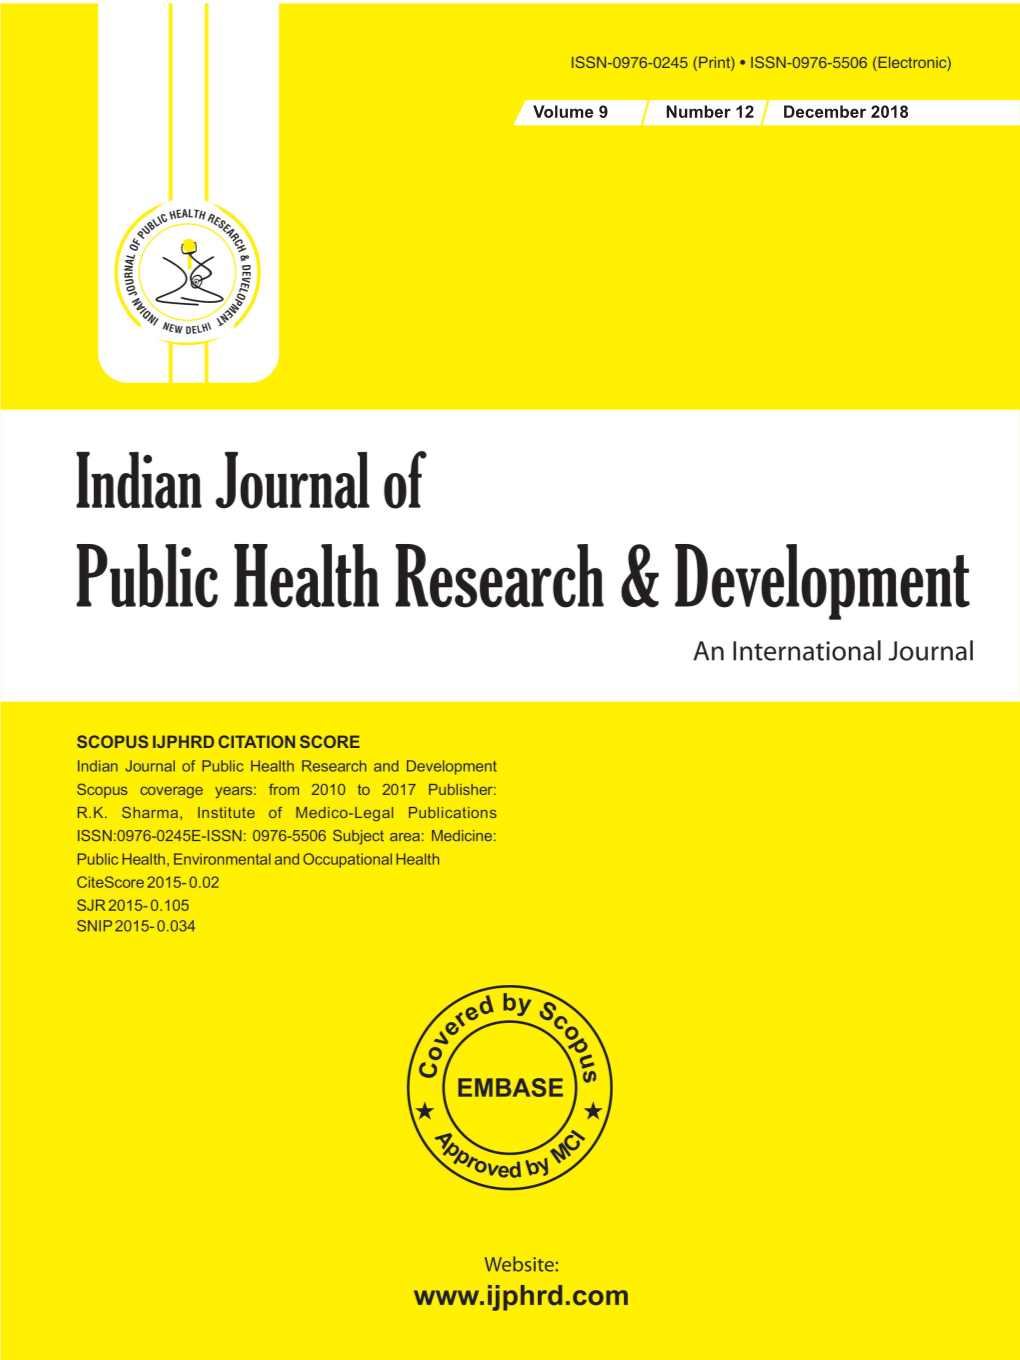 Volume 9 Number 12 December 2018 Indian Journal of Public Health Research & Development EXECUTIVE EDITOR